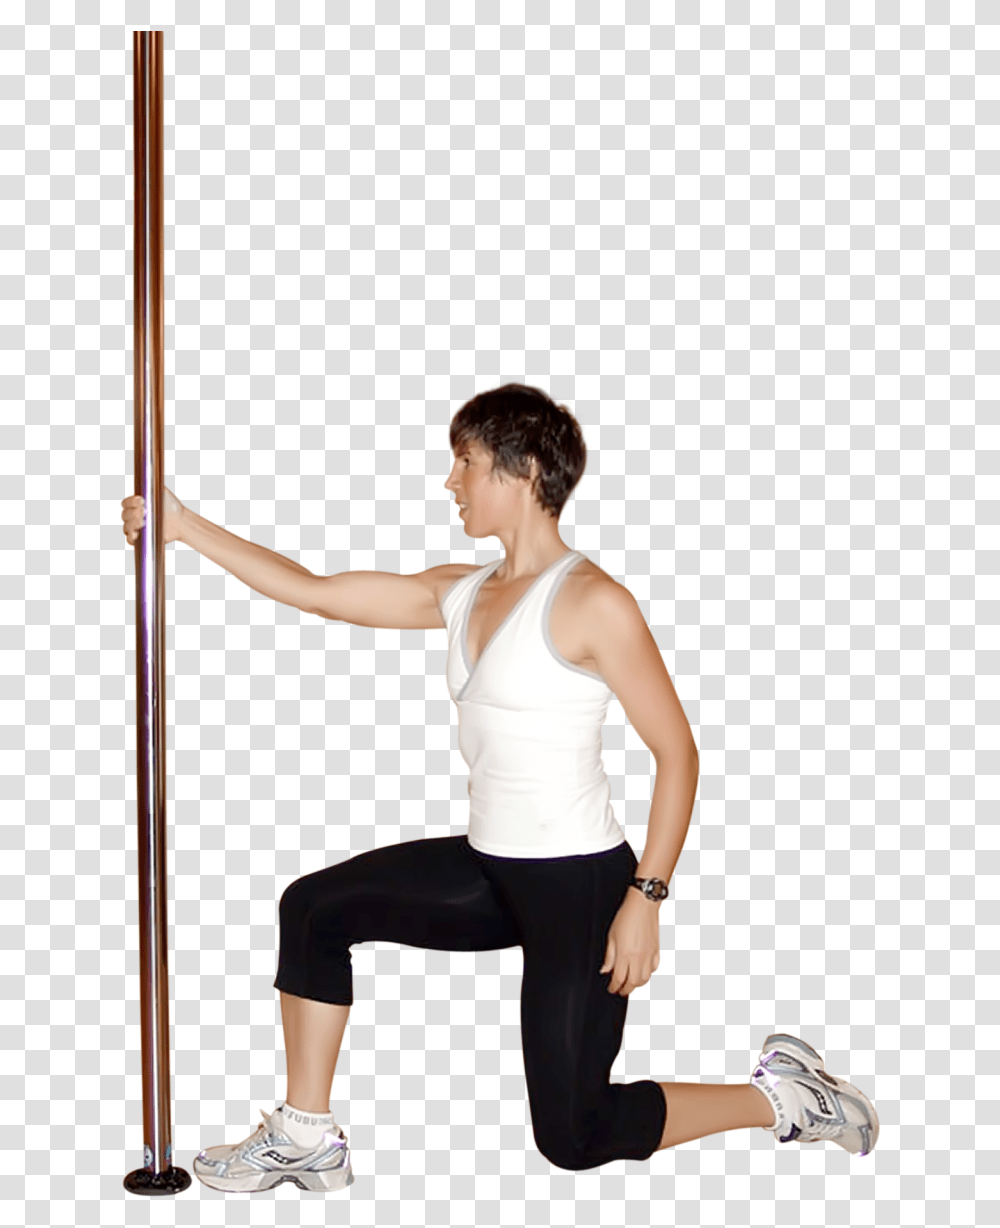 Pole Dancing Image Lunge Holding Pole Pole, Person, Leisure Activities, Furniture Transparent Png